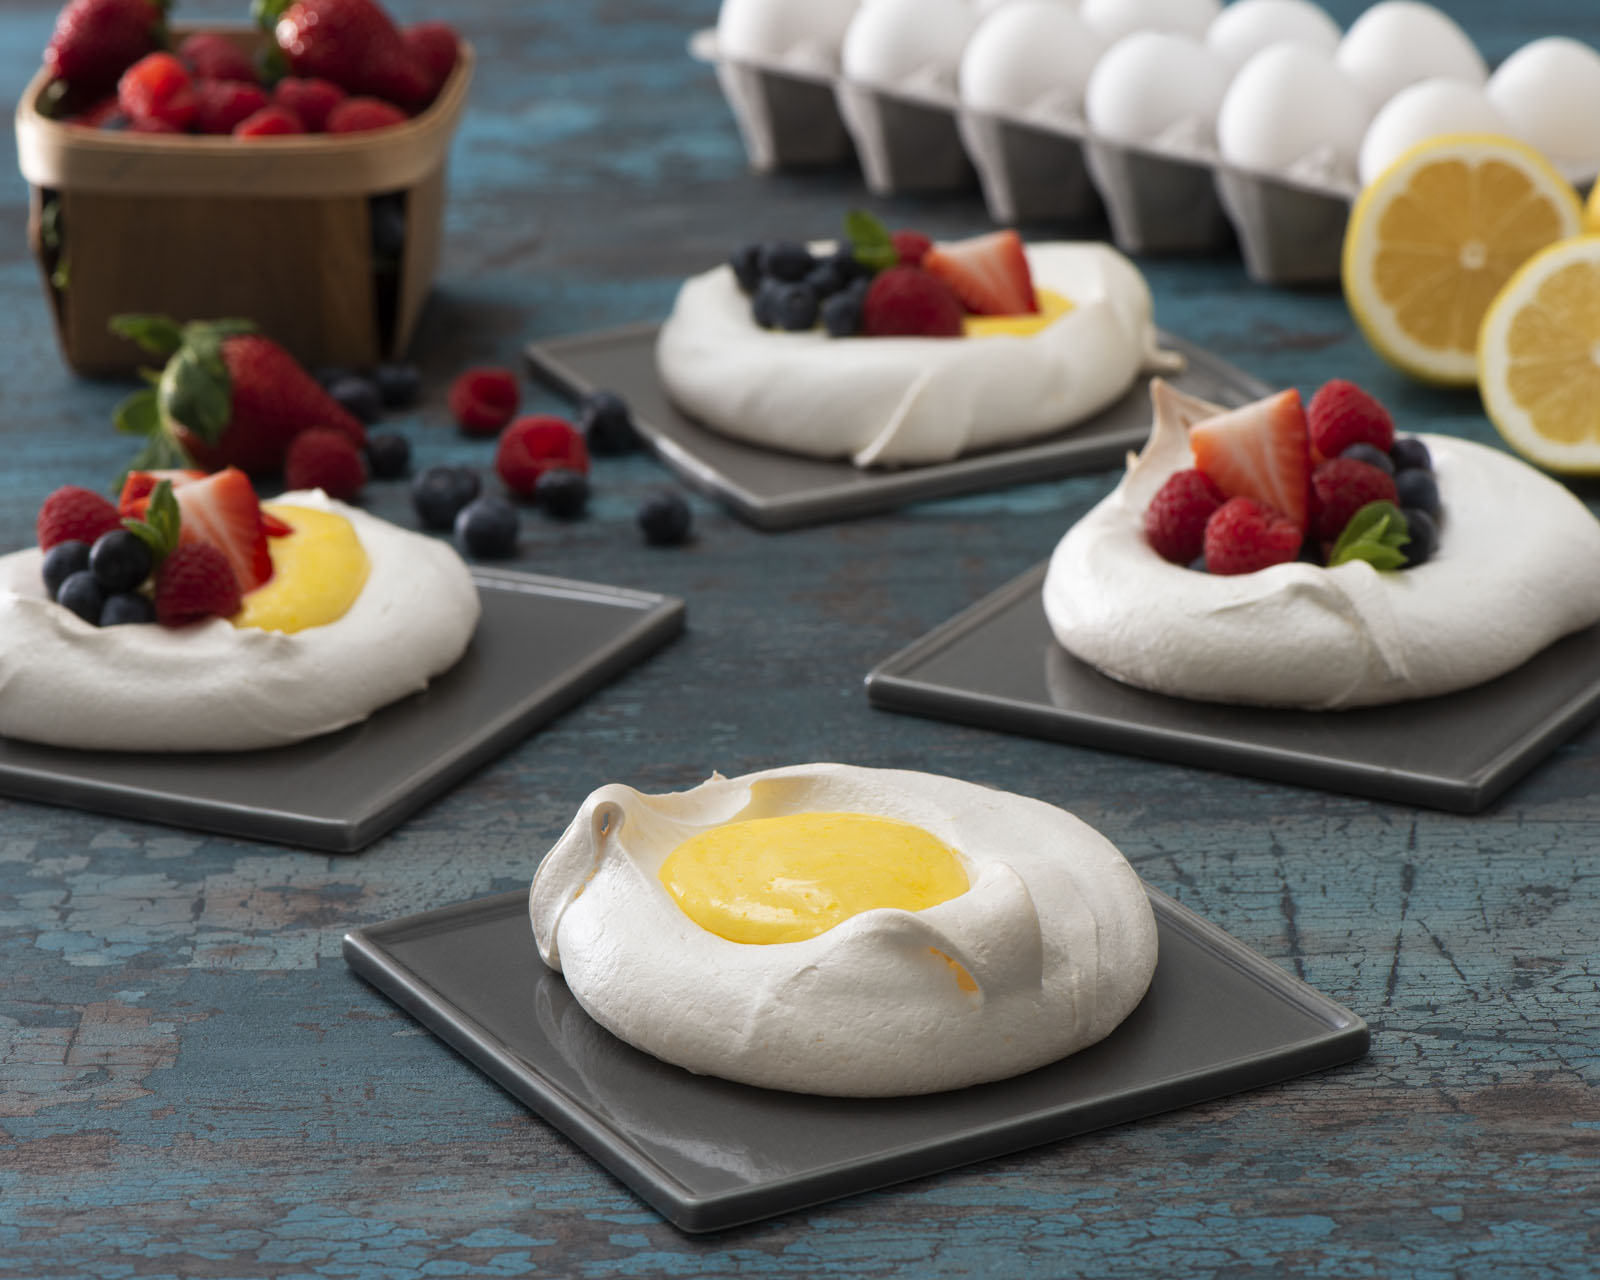 Easter pavlova recipe - 42 recipes to make your holiday meal the best